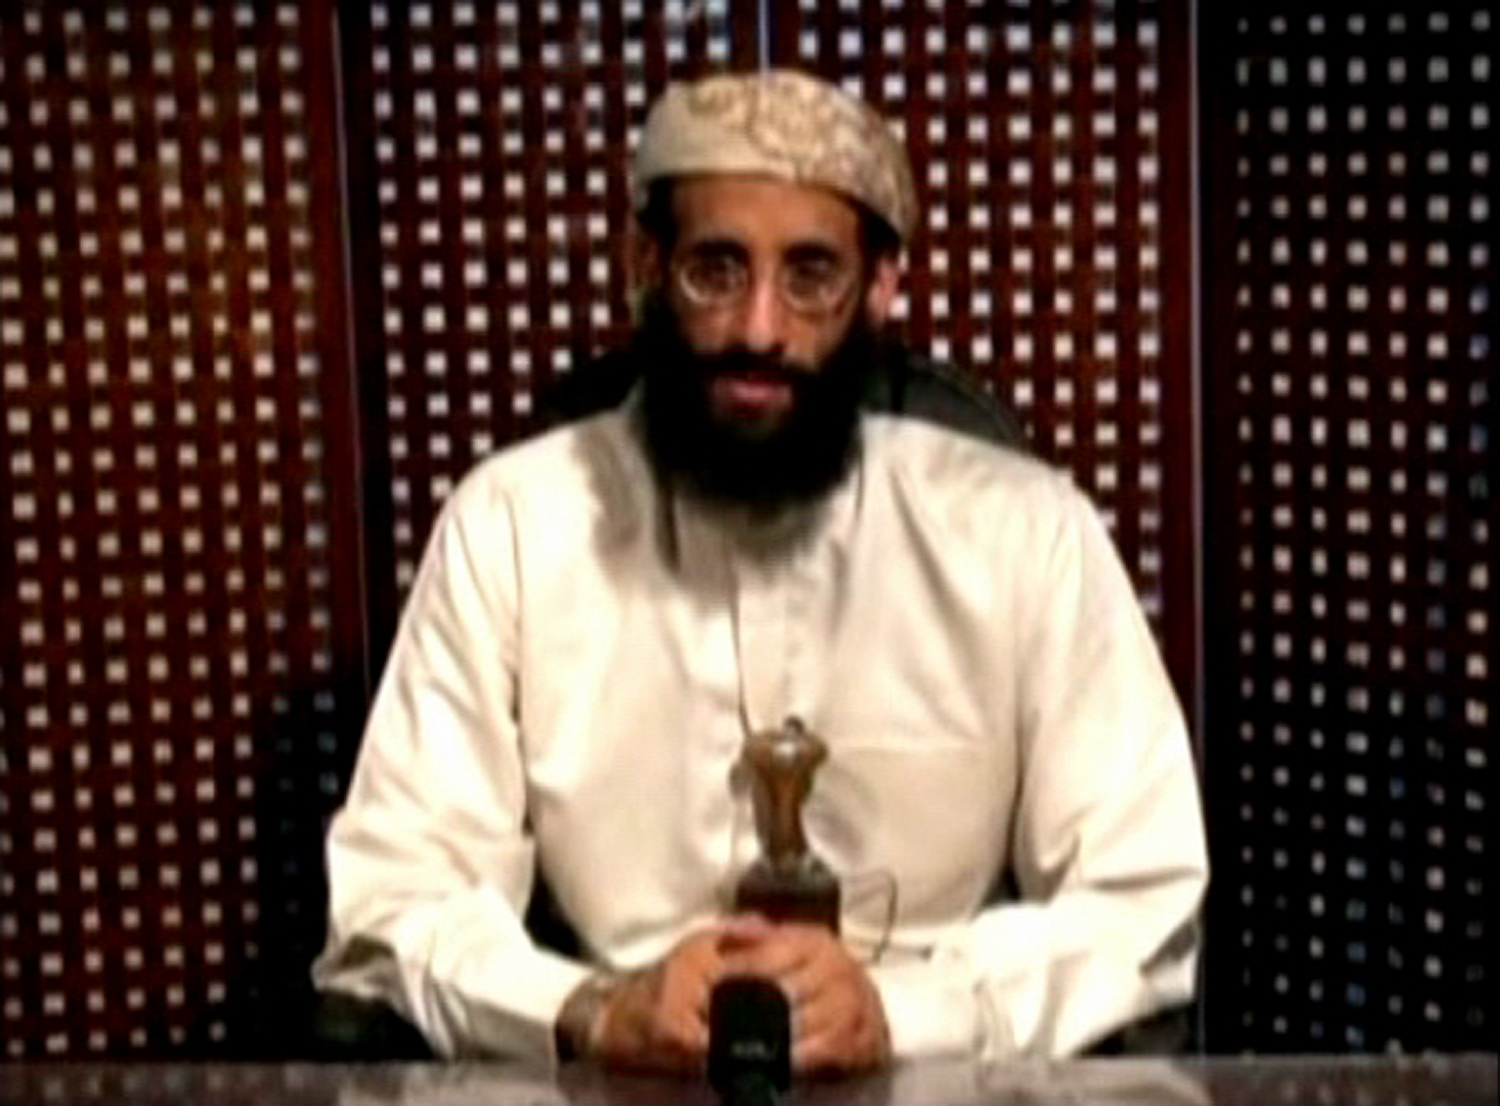 Anwar al-Awlaki, a U.S.-born cleric linked to al Qaeda's Yemen-based wing, gives a religious lecture in an unknown location in this still image taken from video released by Intelwire.com on Sept. 30, 2011.